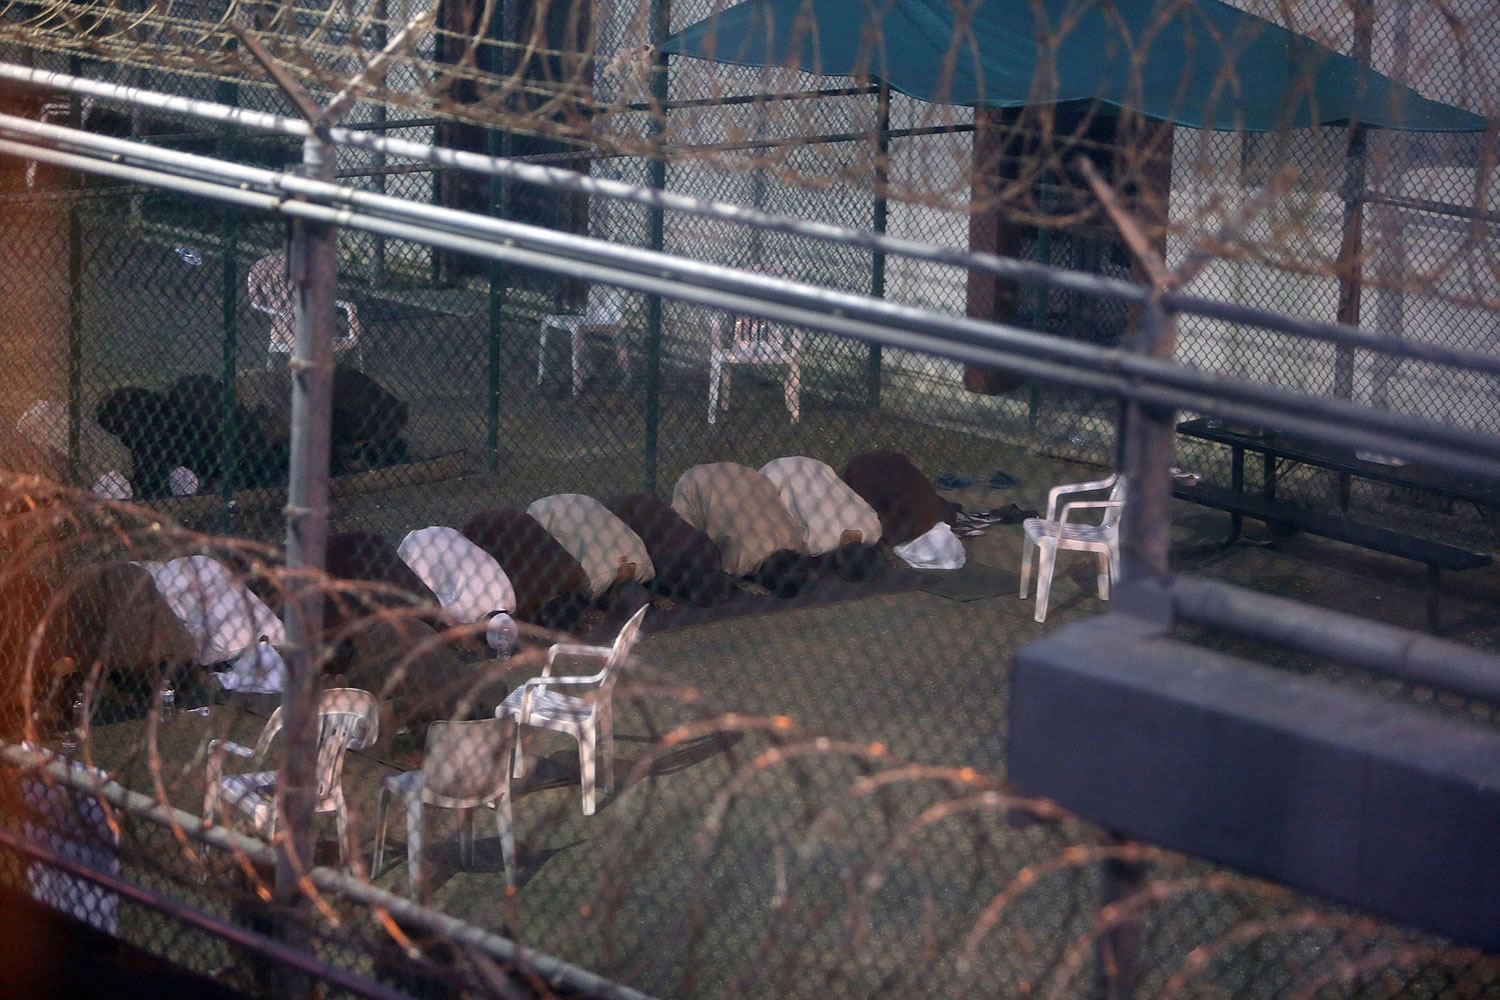 War-on-terror captives from two different cellblocks, separated by a fence, conduct communal evening prayers at the Camp 6 prison building for cooperative captives at the U.S. Navy Base at Guantanamo Bay, Cuba, on July 7. This photo was taken through a closed window. U.S.